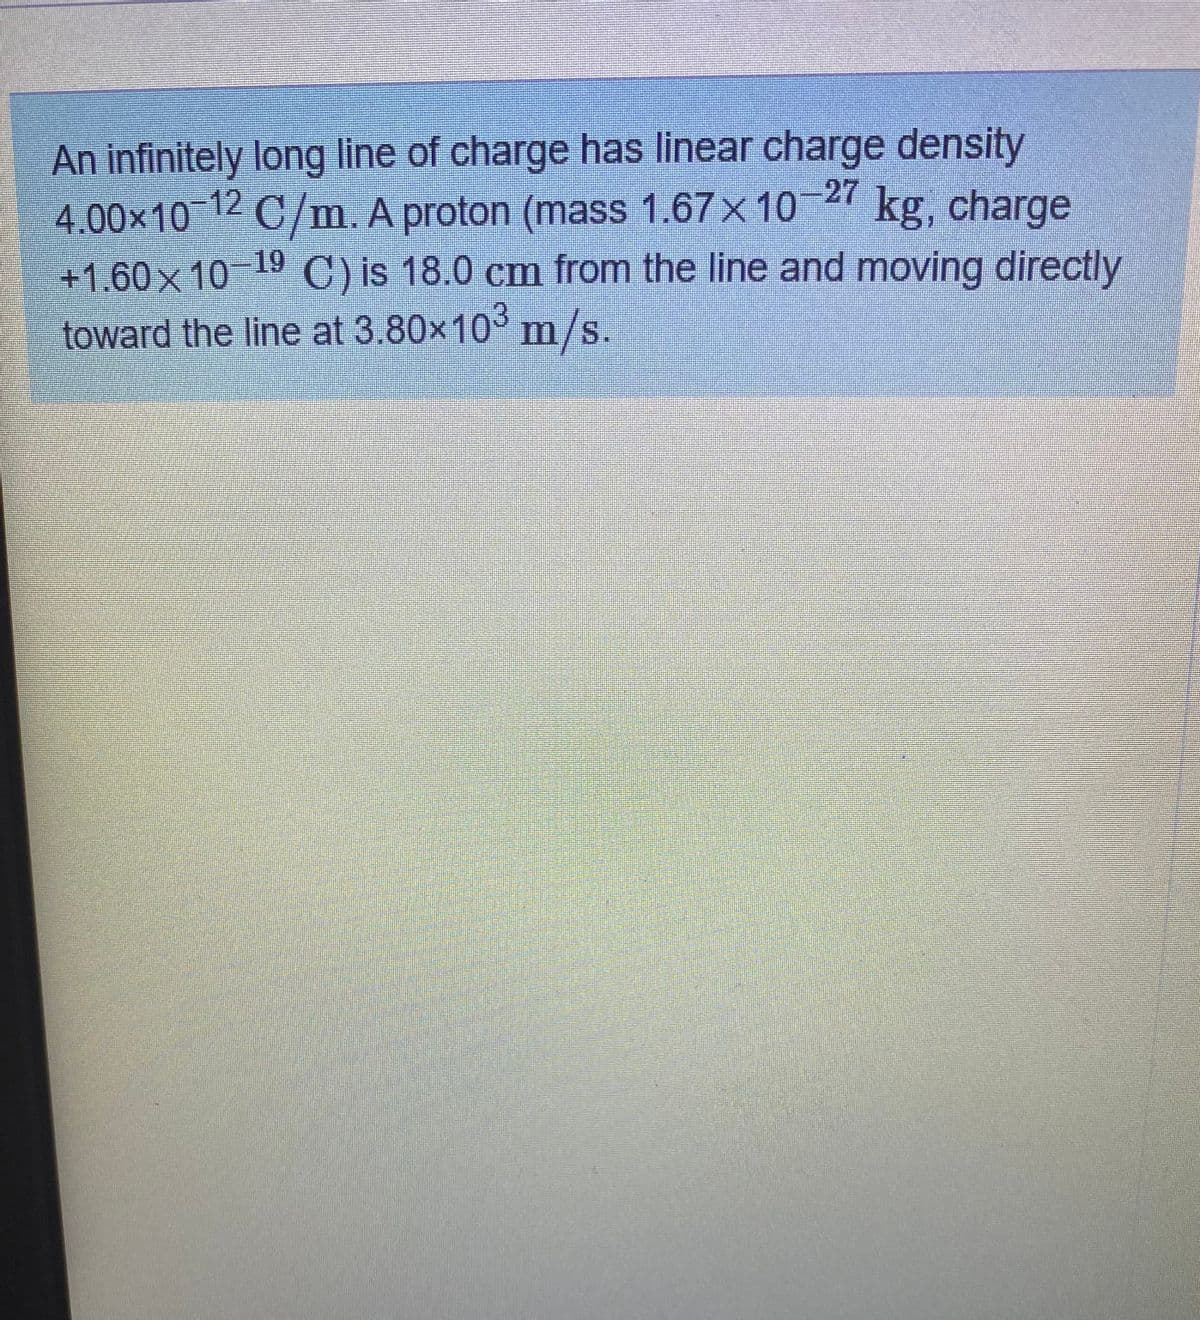 An infinitely long line of charge has linear charge density
4.00×10 C/m. A proton (mass 1.67x 10
+1.60x 10 C) is 18.0 cm from the line and moving directly
12
27 kg, charge
19
toward the line at 3.80x10 m/s.
